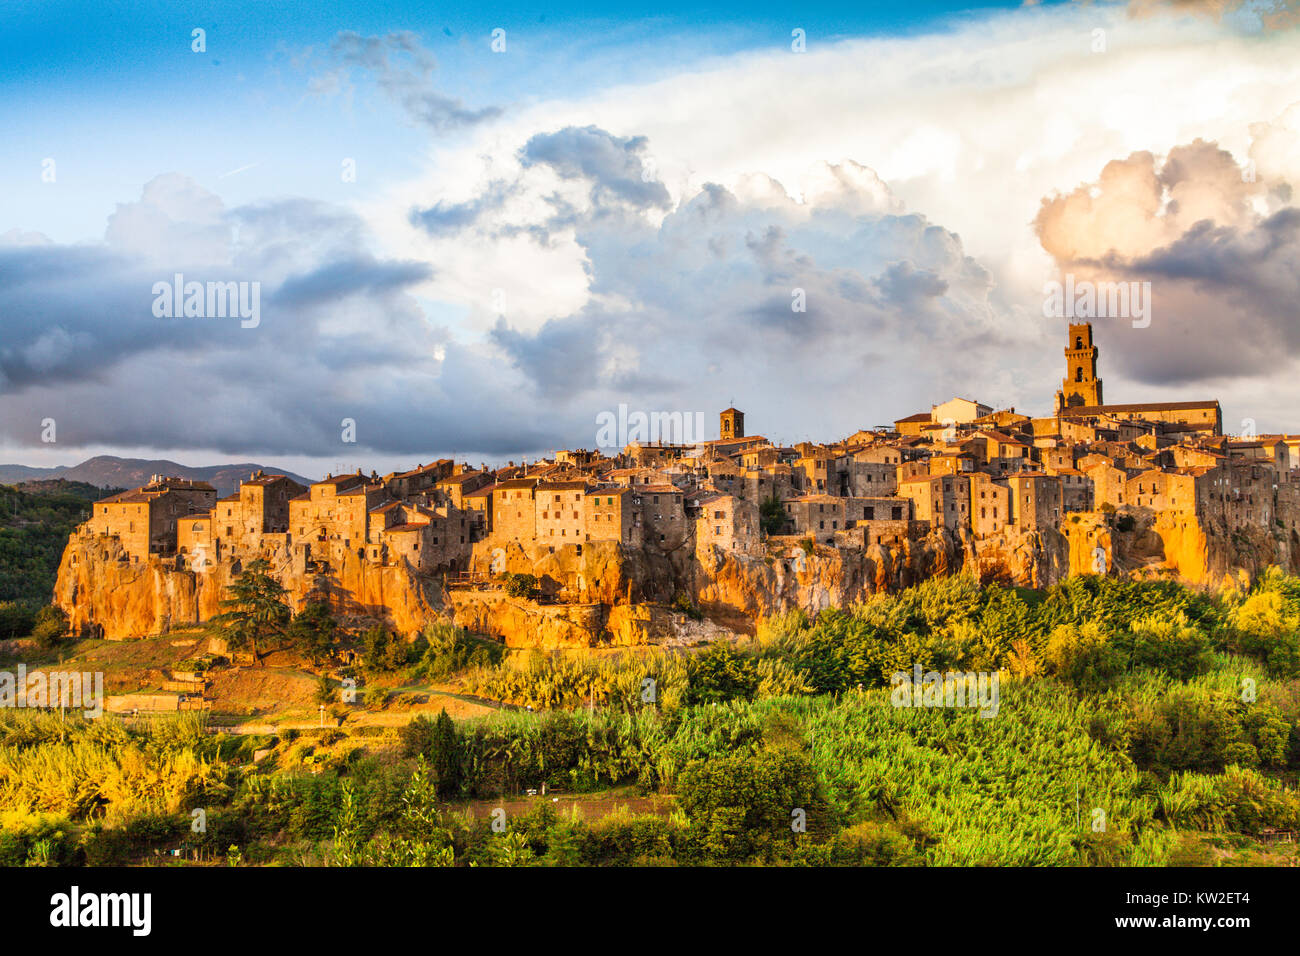 Medieval town of Pitigliano at sunset, Tuscany, Italy Stock Photo